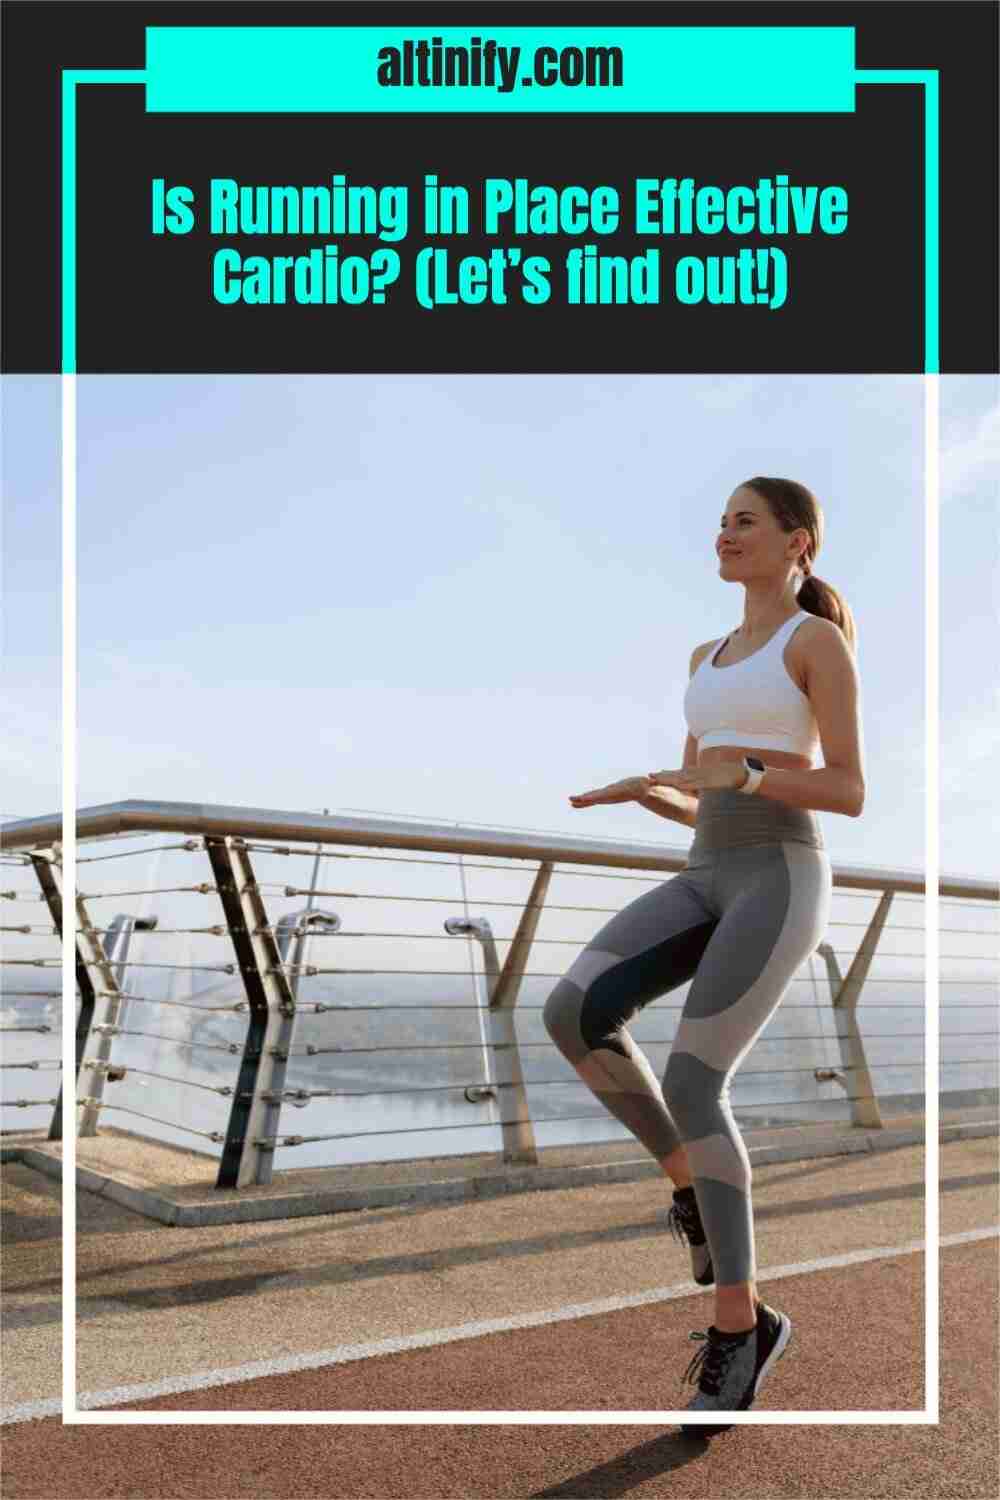 Is Running in Place Effective Cardio? (Let’s find out!)